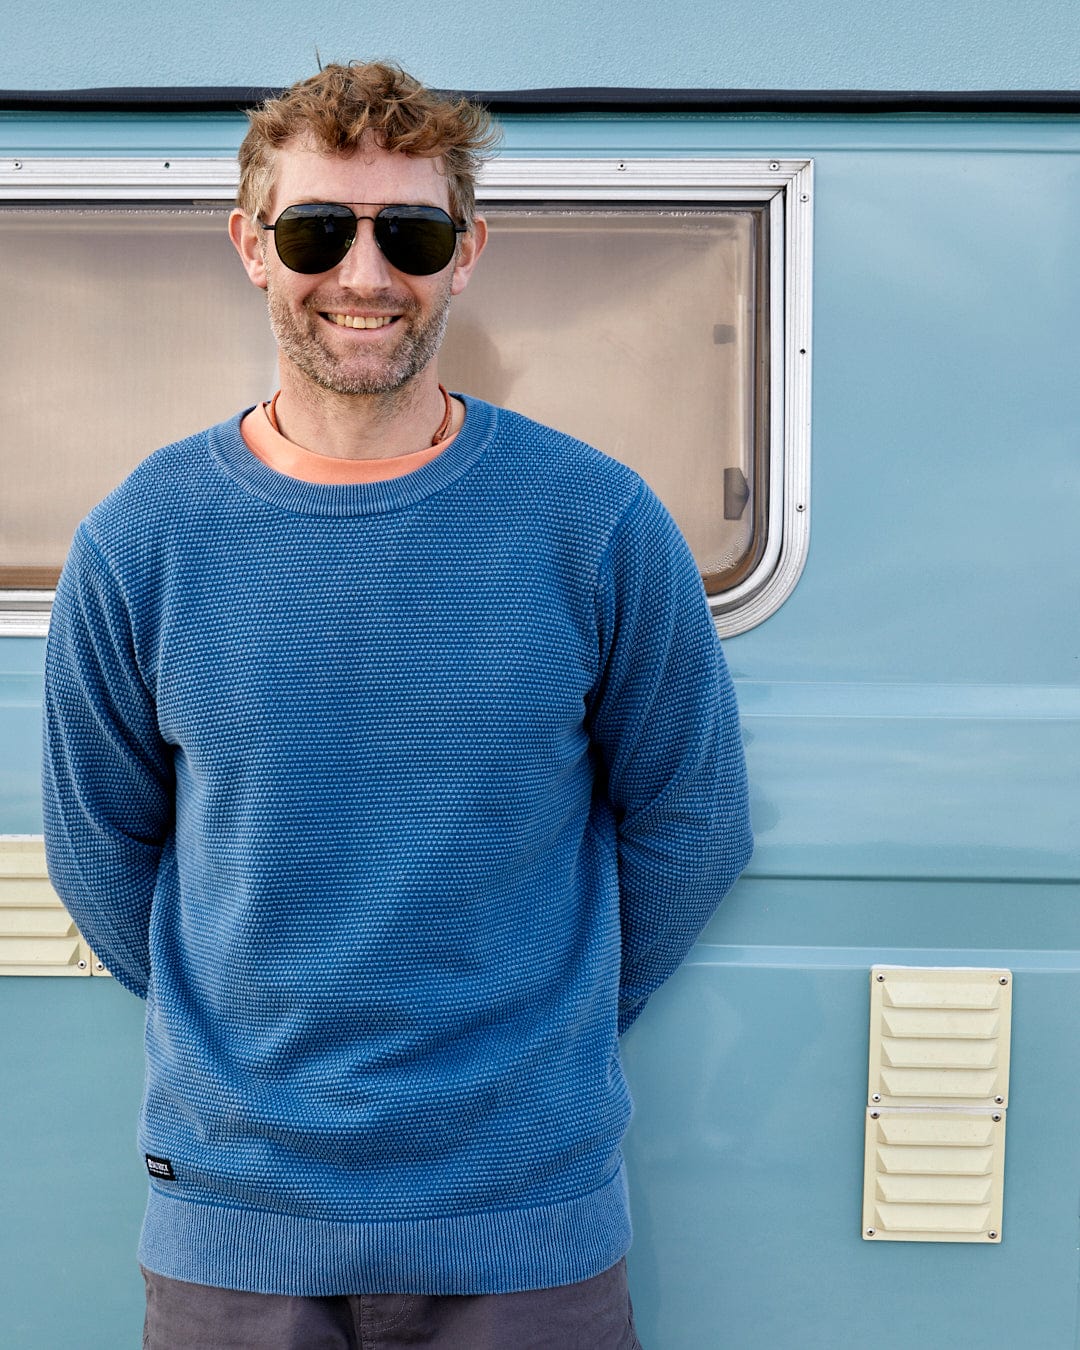 A man in a Saltrock Moss - Mens Washed Knitted Crew - Blue cotton sweatshirt standing next to a blue camper van.